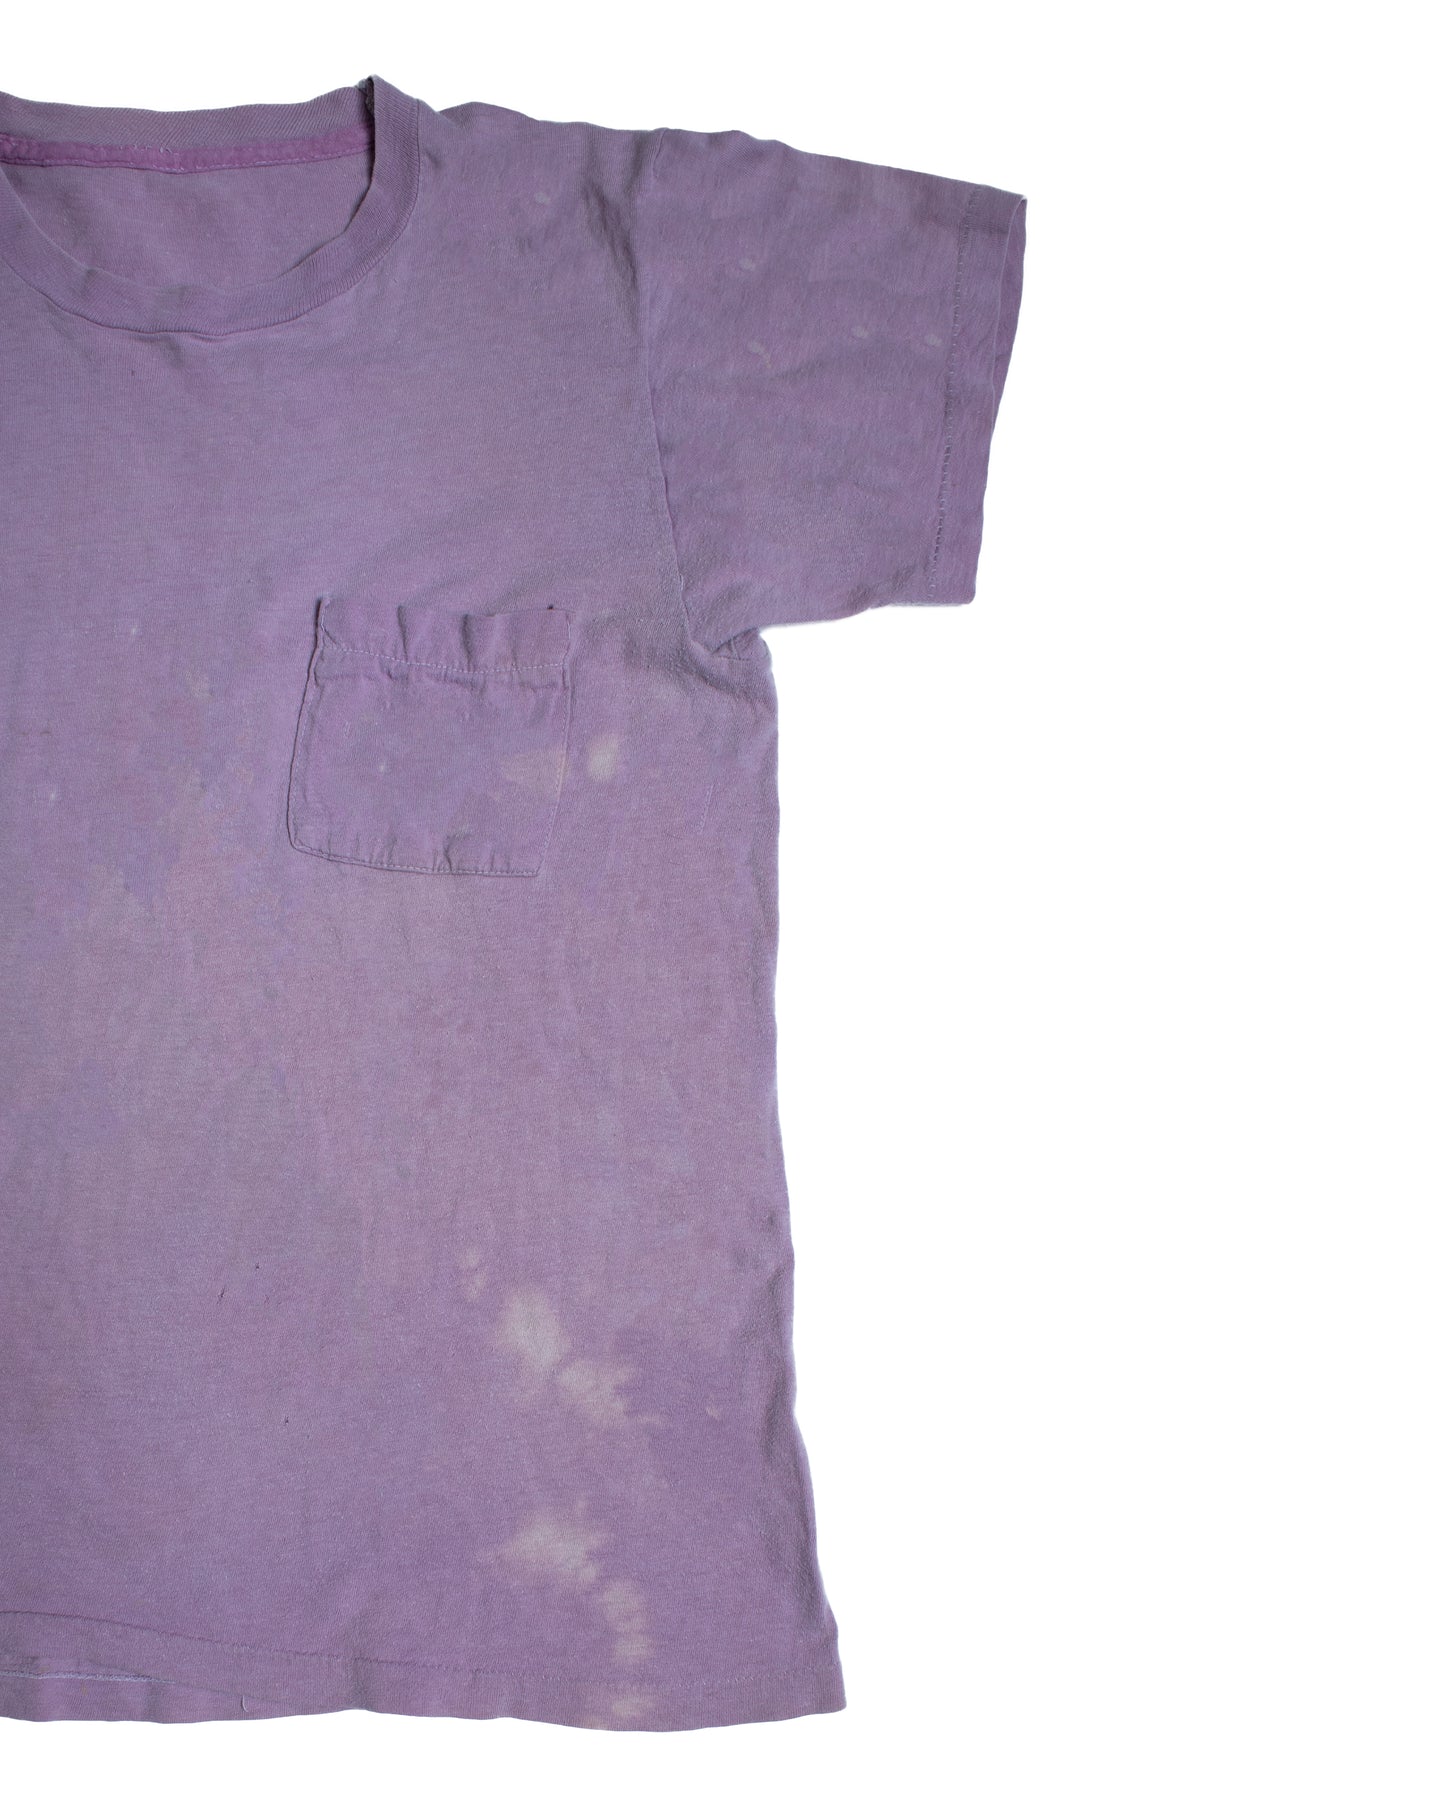 1980's Faded Lavender Tee